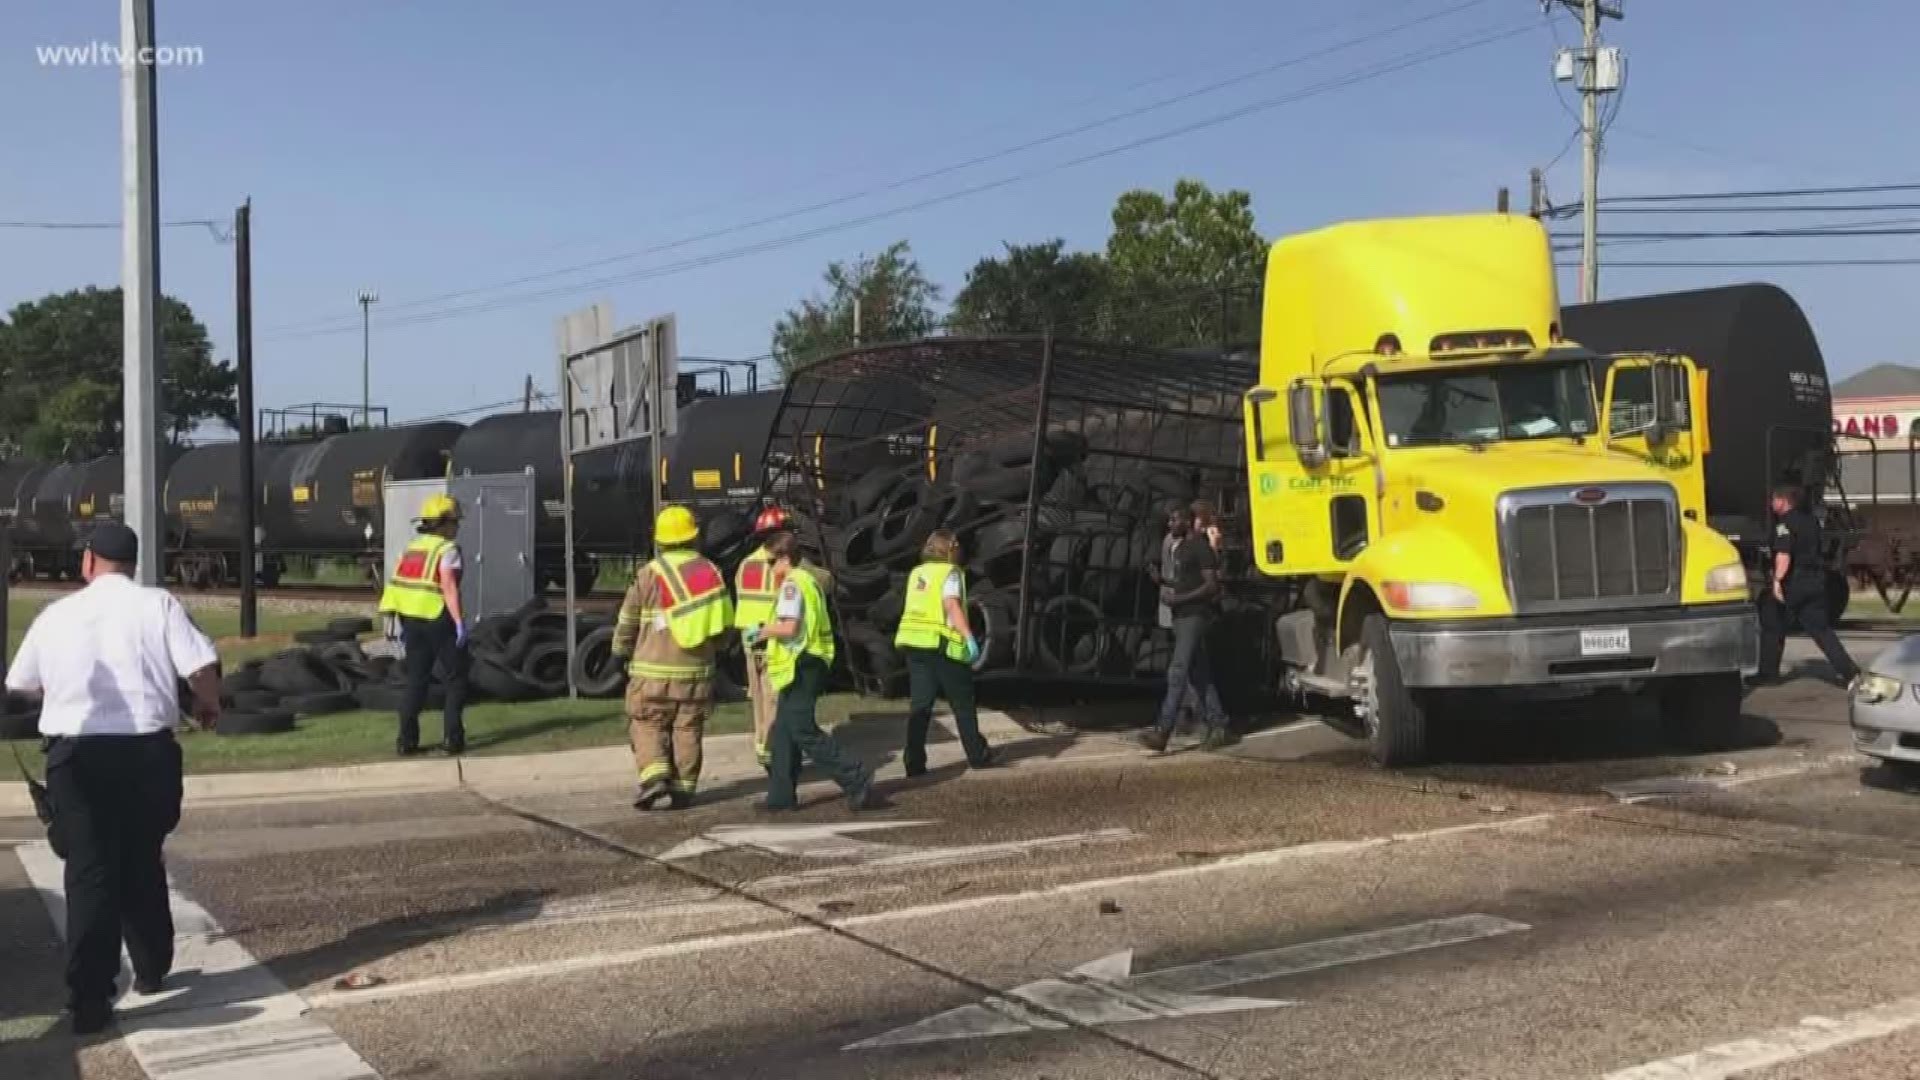 Train crash closes busy intersection in Slidell